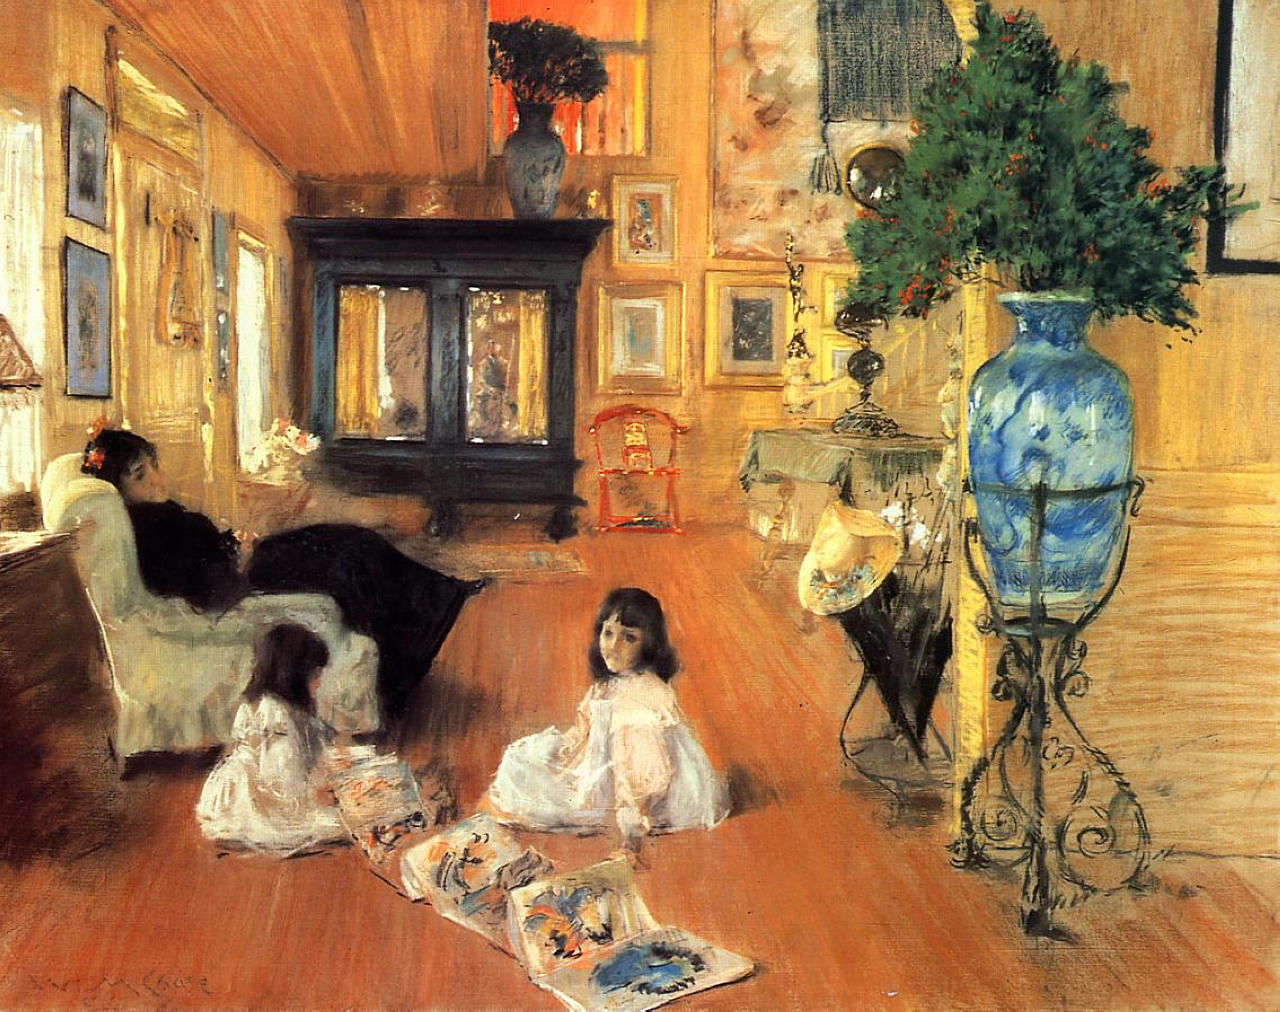 Hall at Shinnecock, by William Merritt Chase, 1892